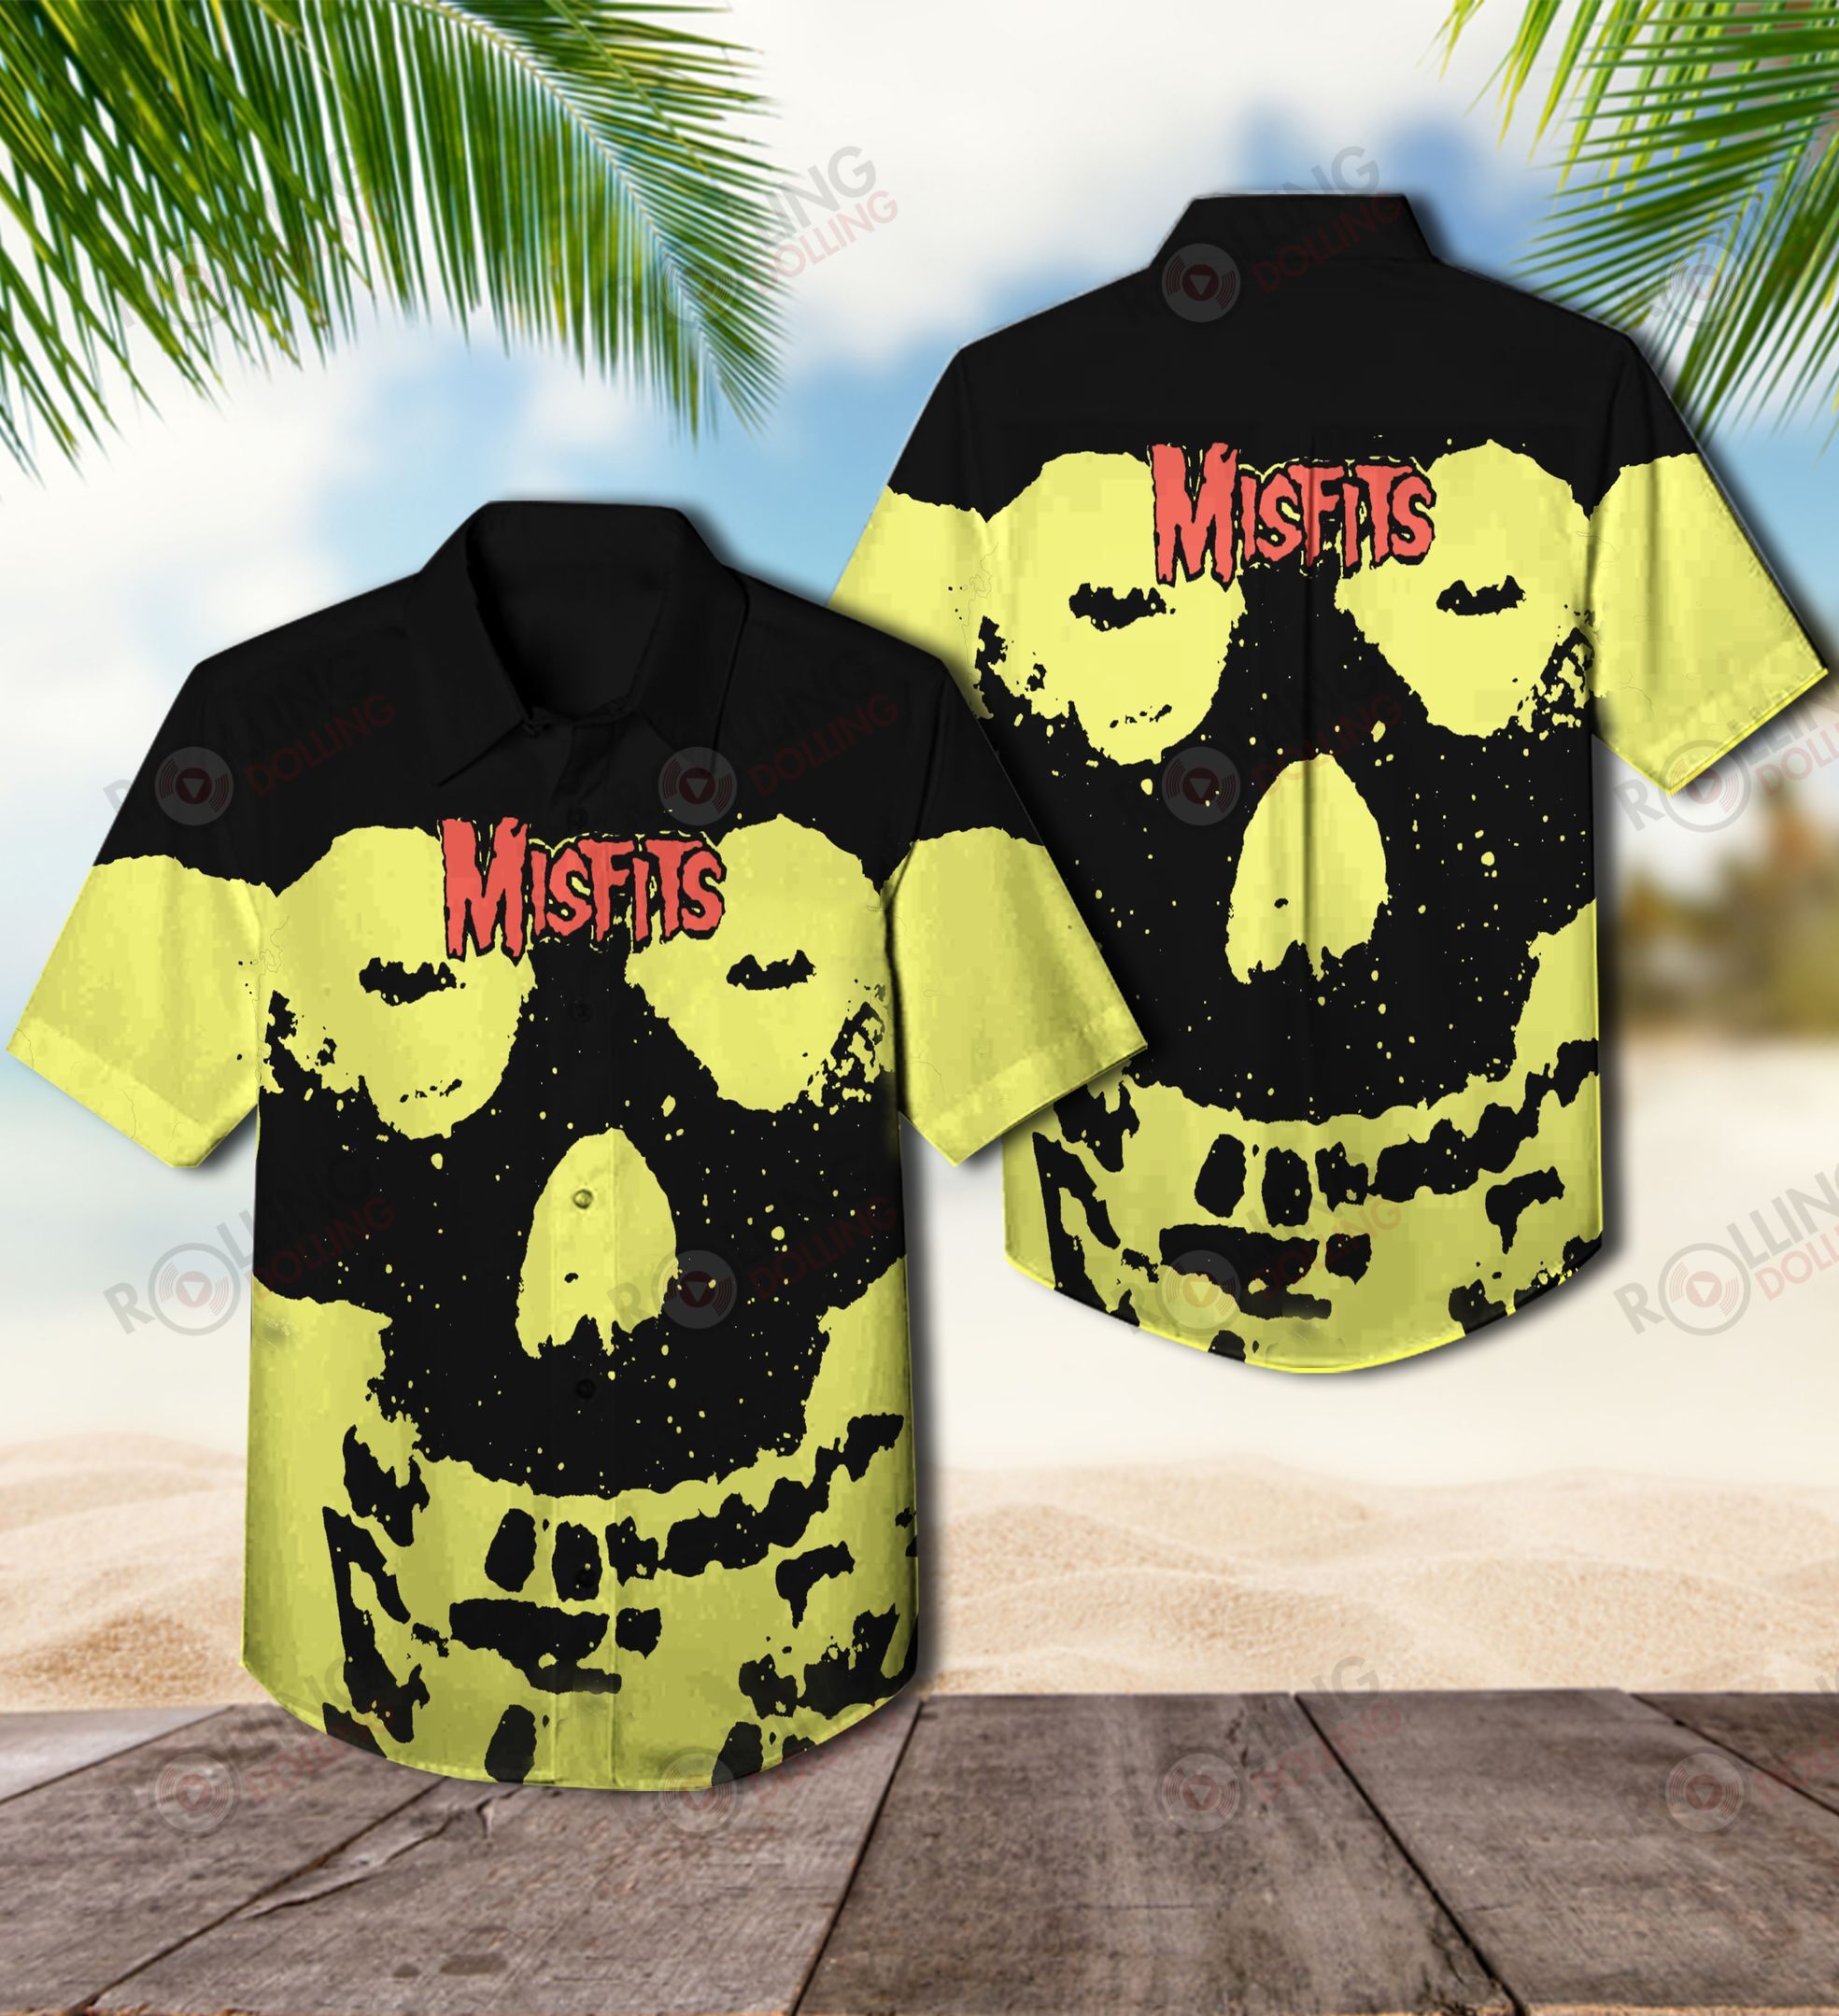 This would make a great gift for any fan who loves Hawaiian Shirt as well as Rock band 22